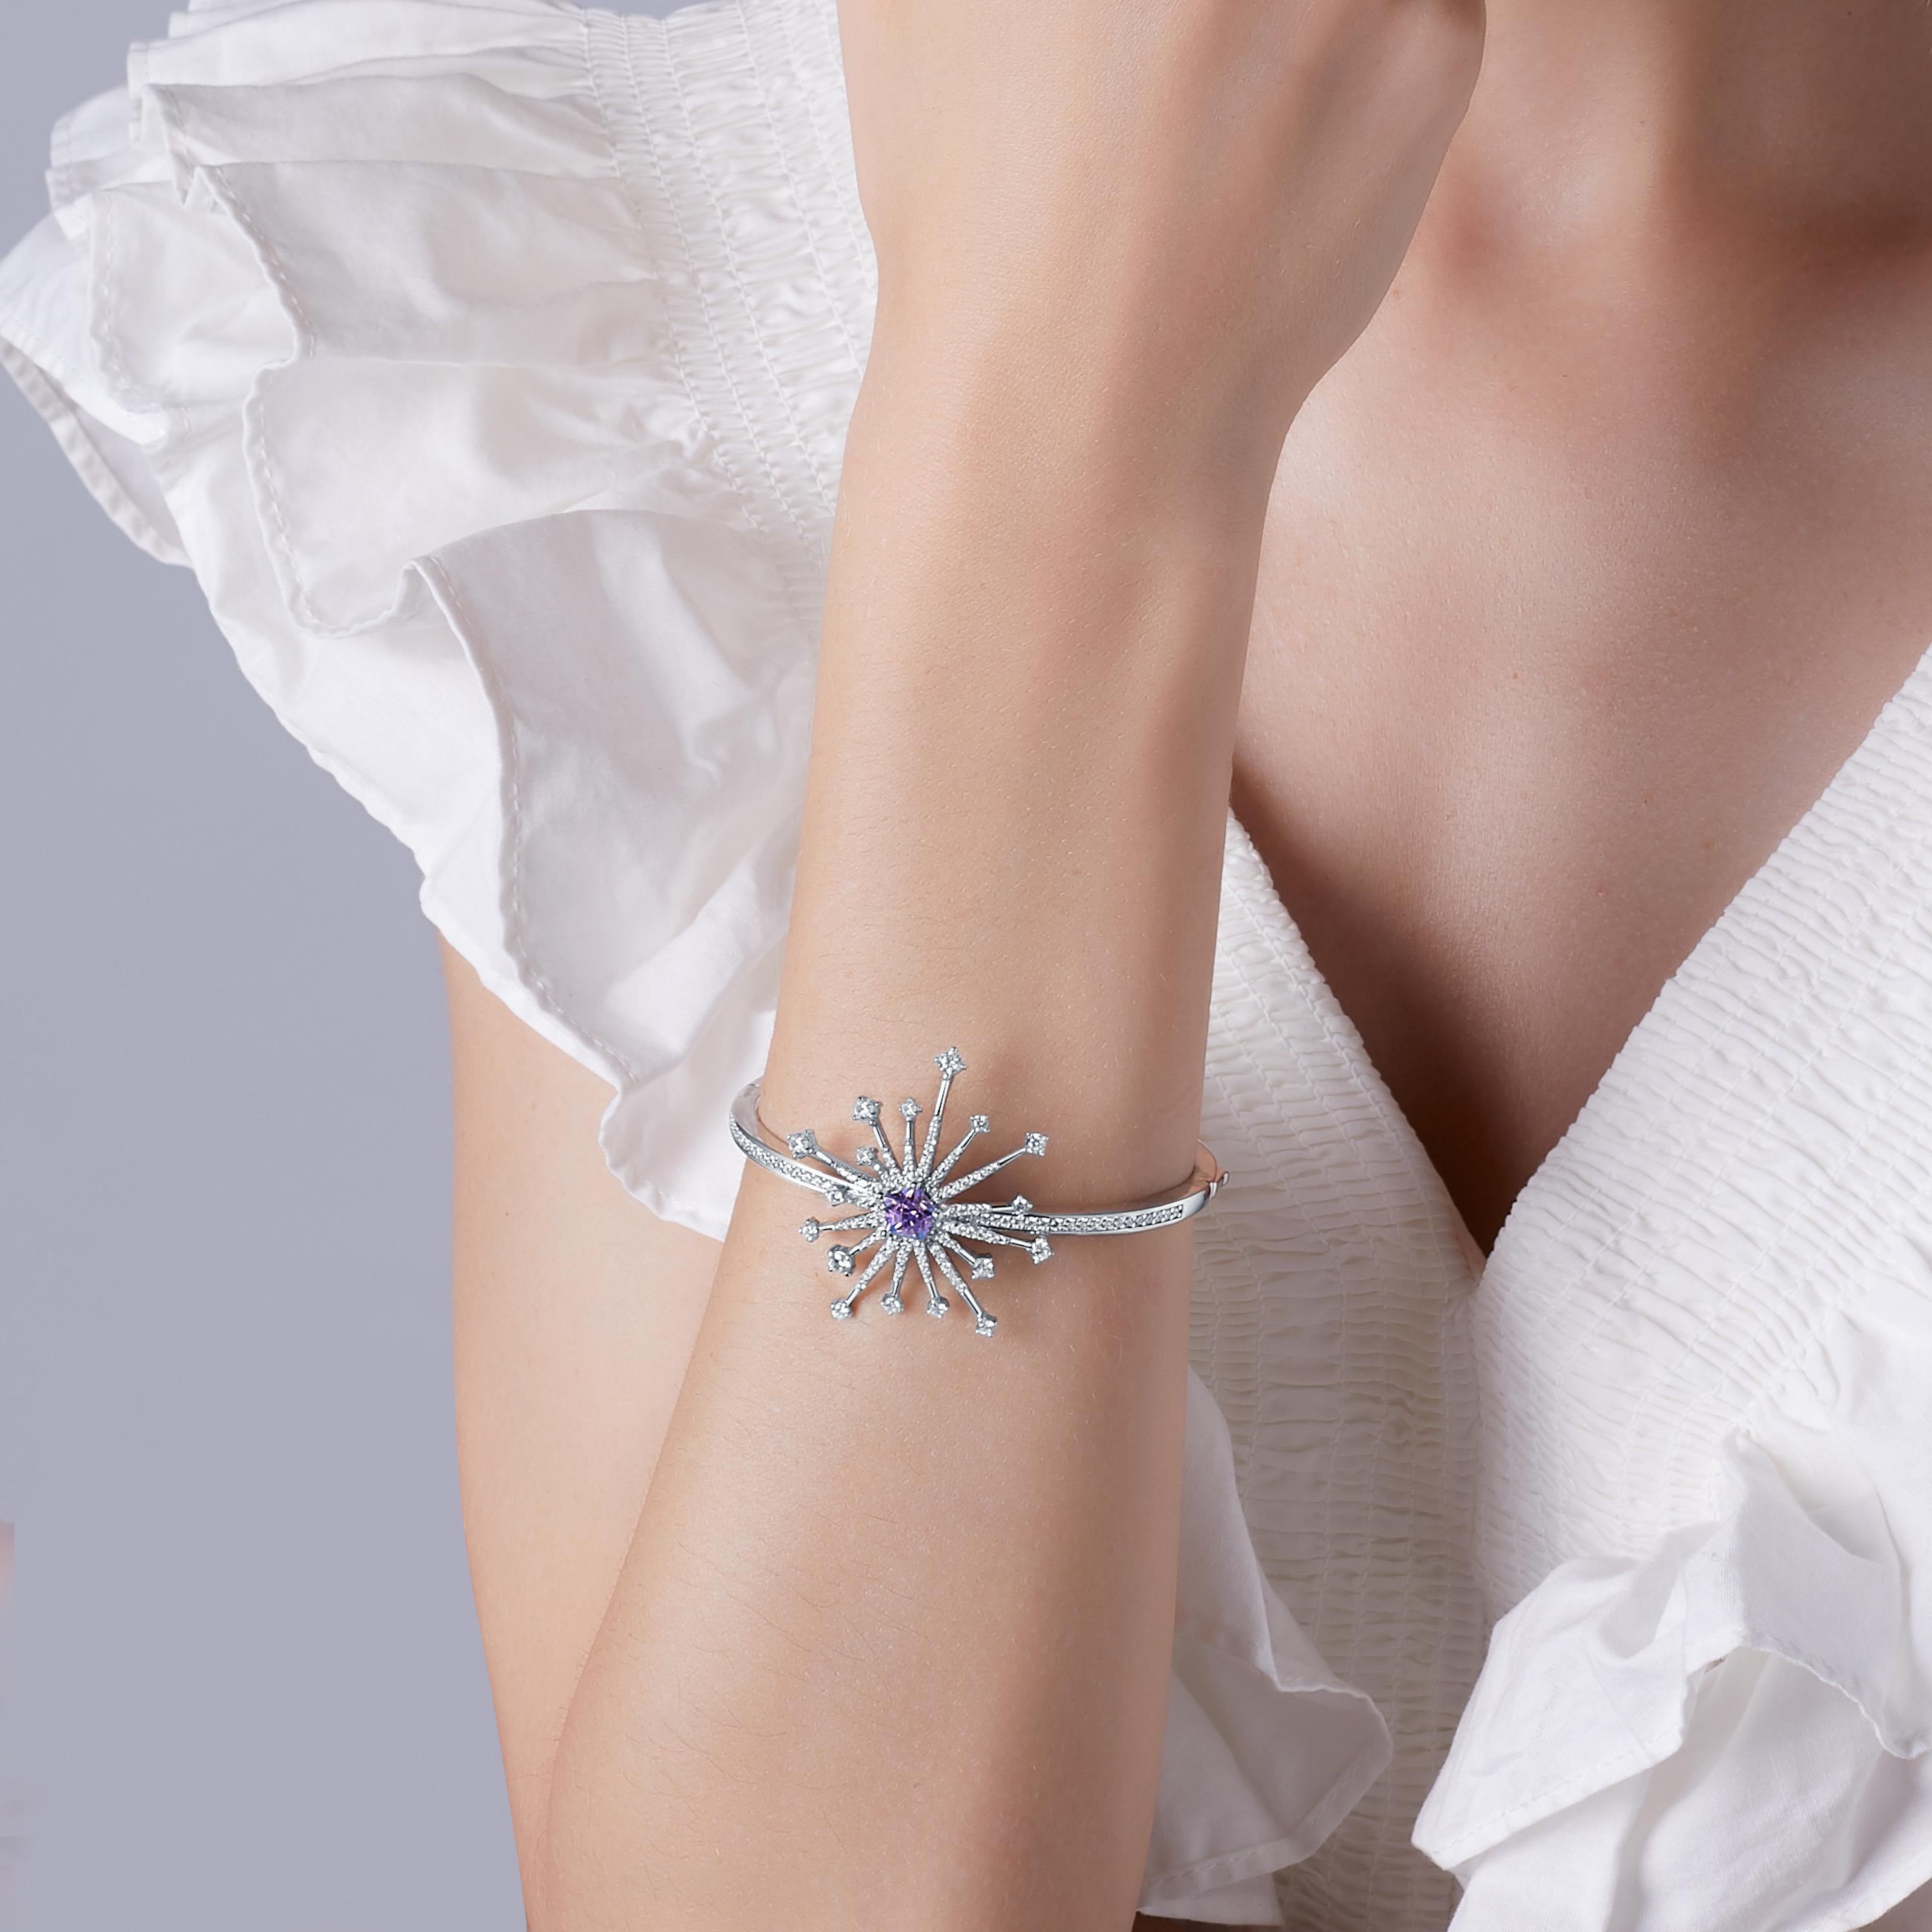 Description:
Light up the room with the new Carpe Diem Collection by Fei Liu! Carpe Diem 'Sparkler' bangle with Swarovski Purple-Aqua Pentagon Star cubic zirconia and 8 hearts and 8 arrows CZ, set in white rhodium plate on sterling